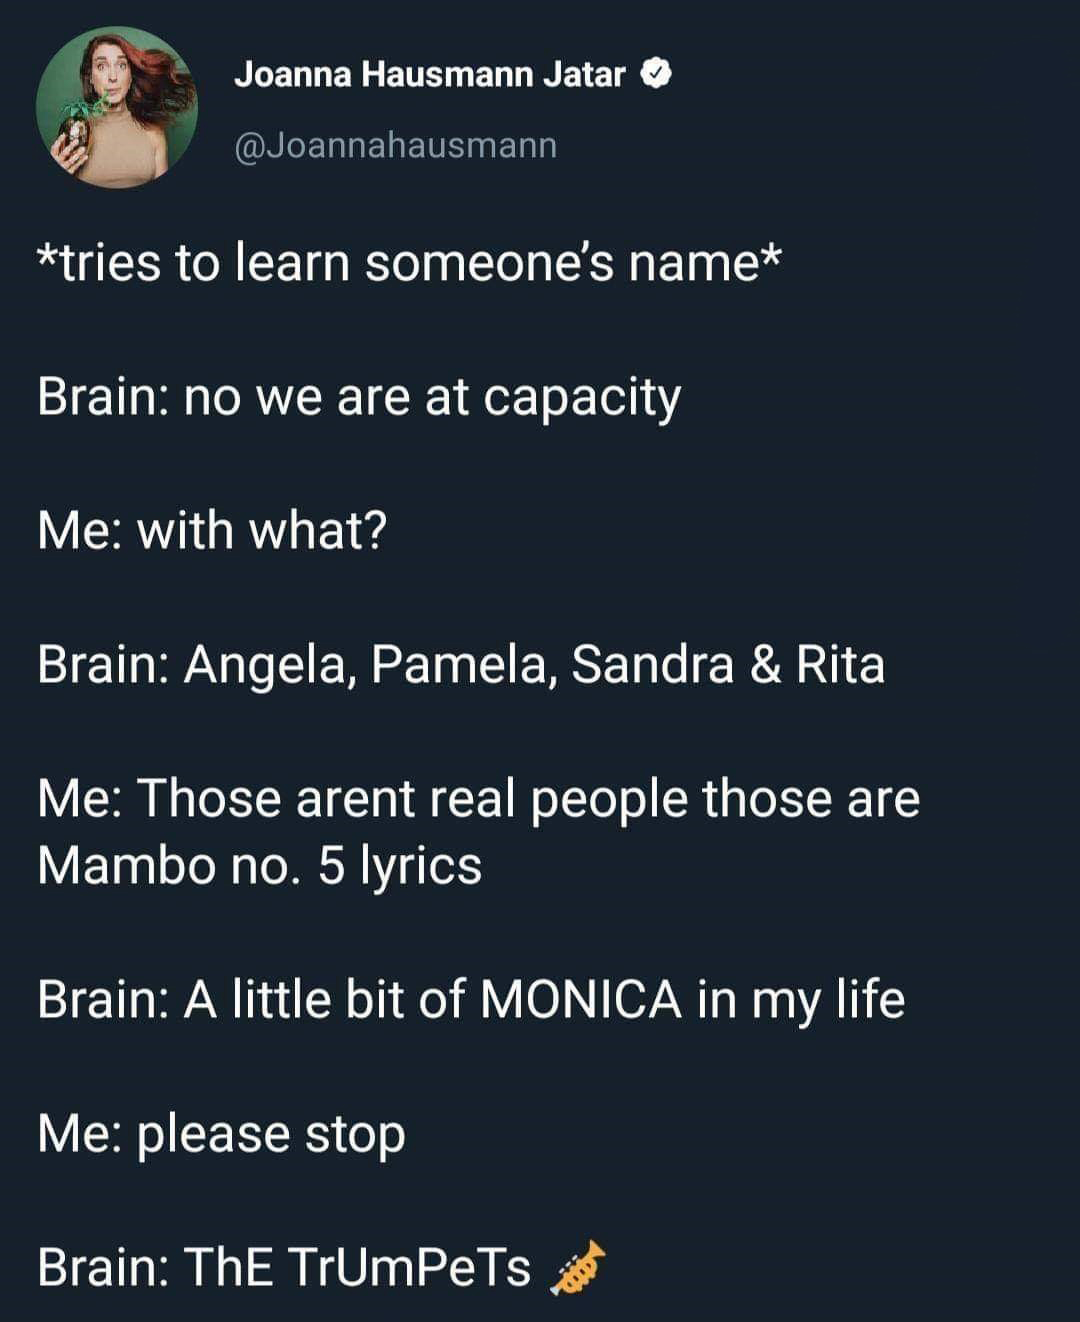 Joanna Hausmann Jatar tries to learn someone's name Brain no we are at capacity Me with what? Brain Angela, Pamela, Sandra & Rita Me Those arent real people those are Mambo no. 5 lyrics Brain A little bit of Monica in my life Me please stop B